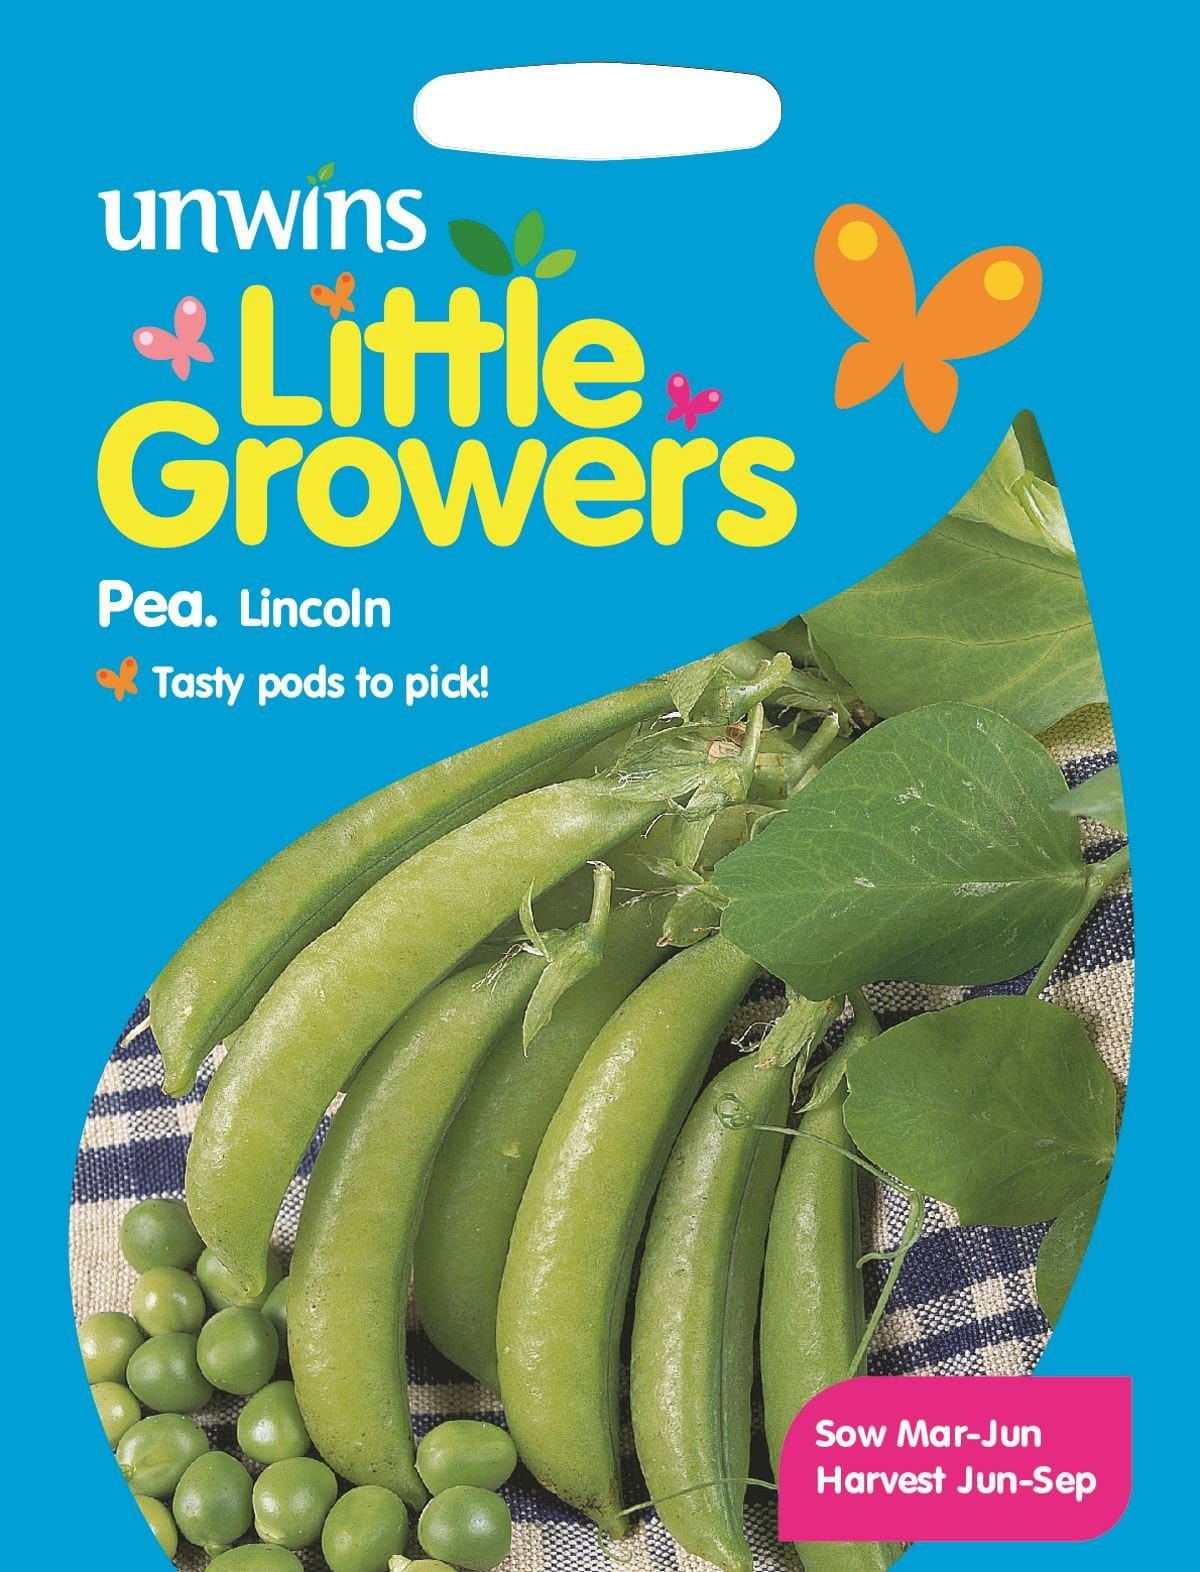 Unwins Little Growers Pea Lincoln 50 Seeds